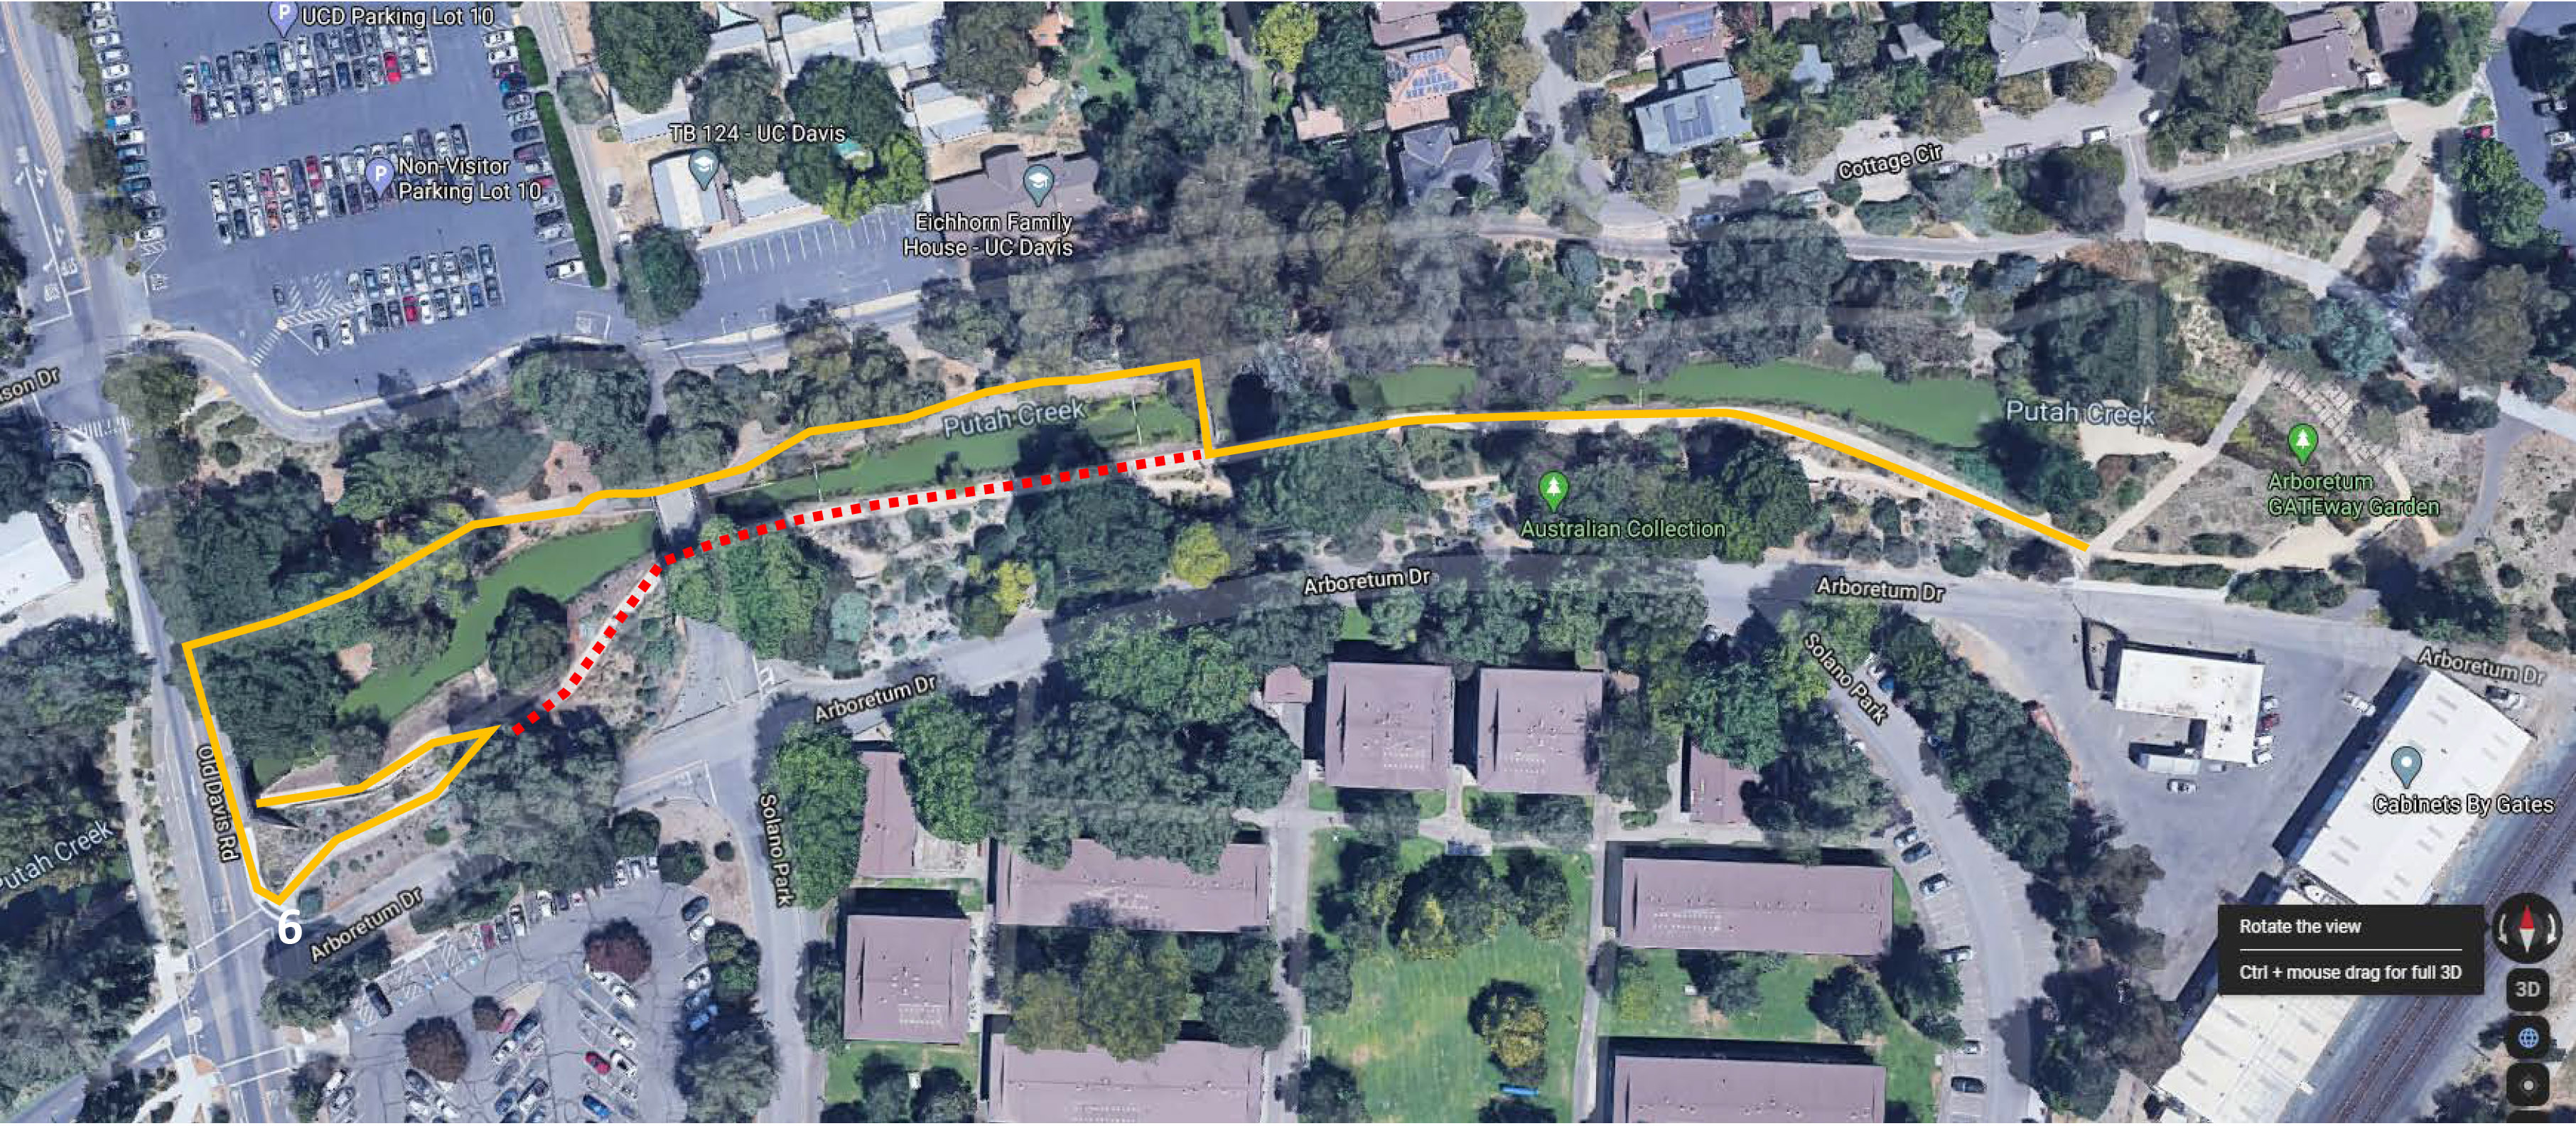 Path closure and detour on south side of bridge